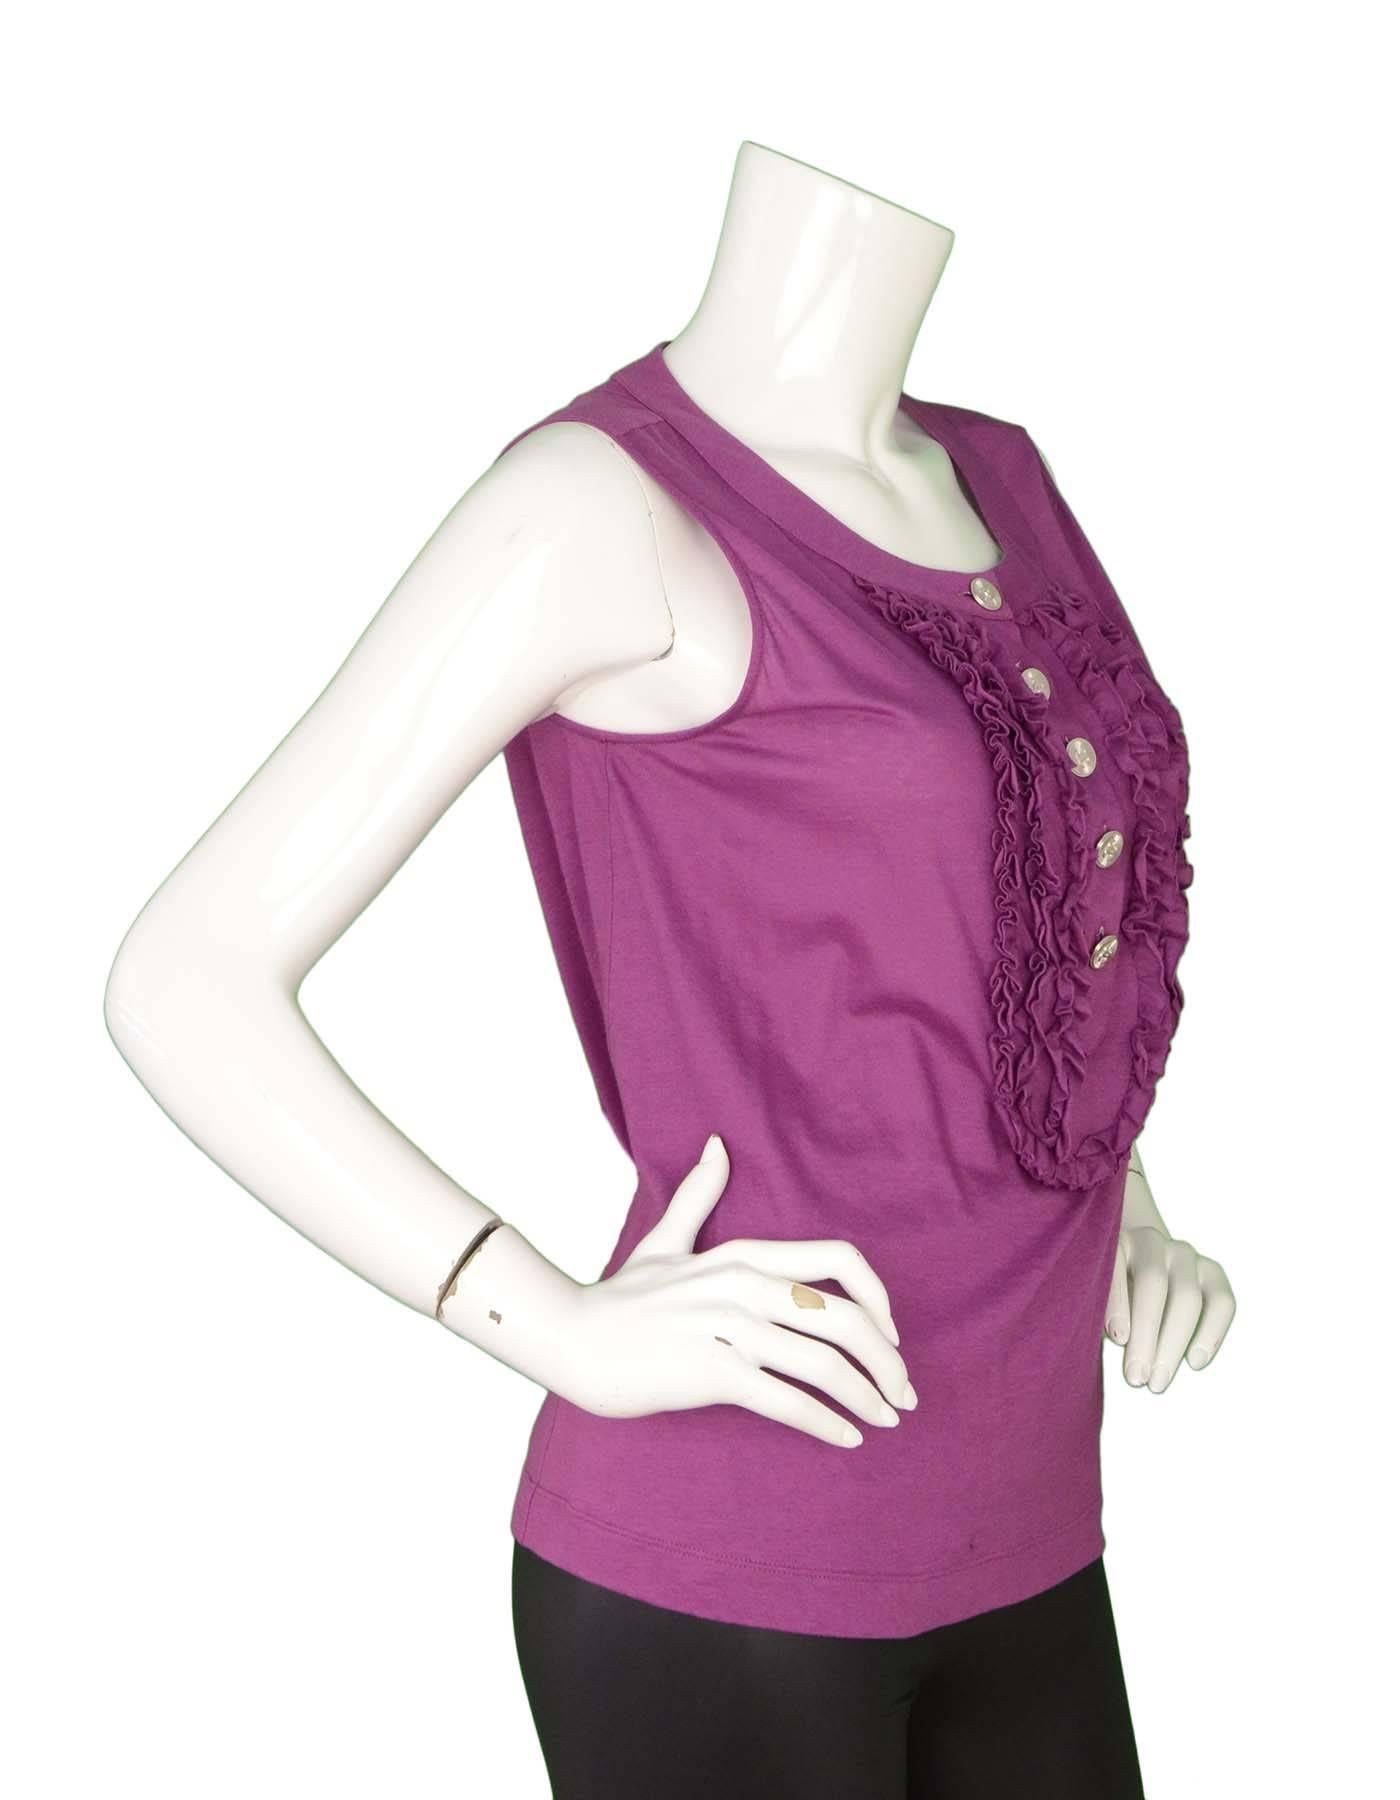 Chanel Purple Cotton Sleeveless Top
Features ruffles down front center with silvertone CC decorative buttons
Made In: France
Year of Production: 2009
Color: Purple
Composition: 100% cotton
Lining: None
Closure/Opening: Pull over with buttons